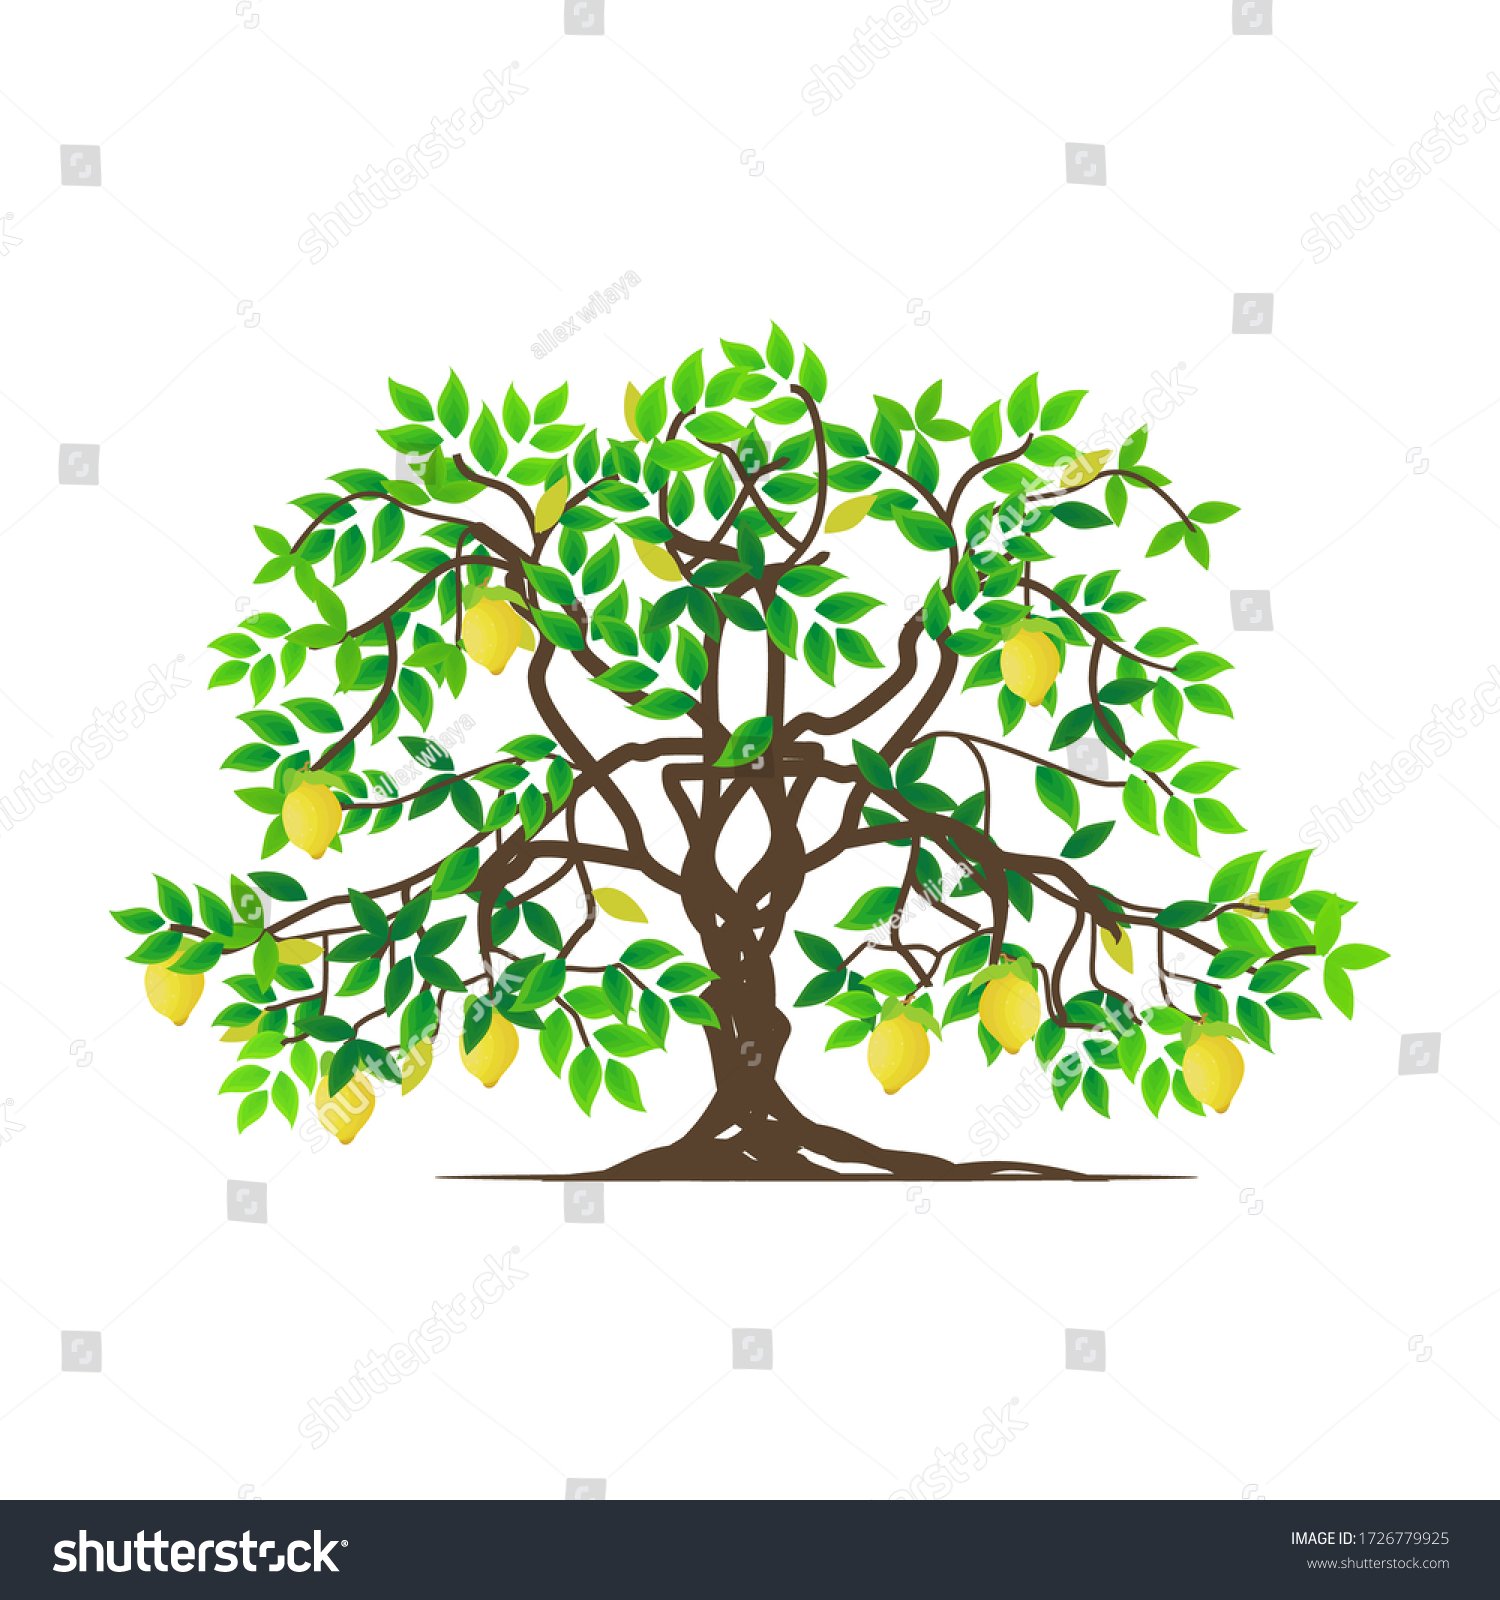 stock-vector-isolated-tree-and-lemon-plants-on-a-white-background-vector-illustration-1726779925.jpg